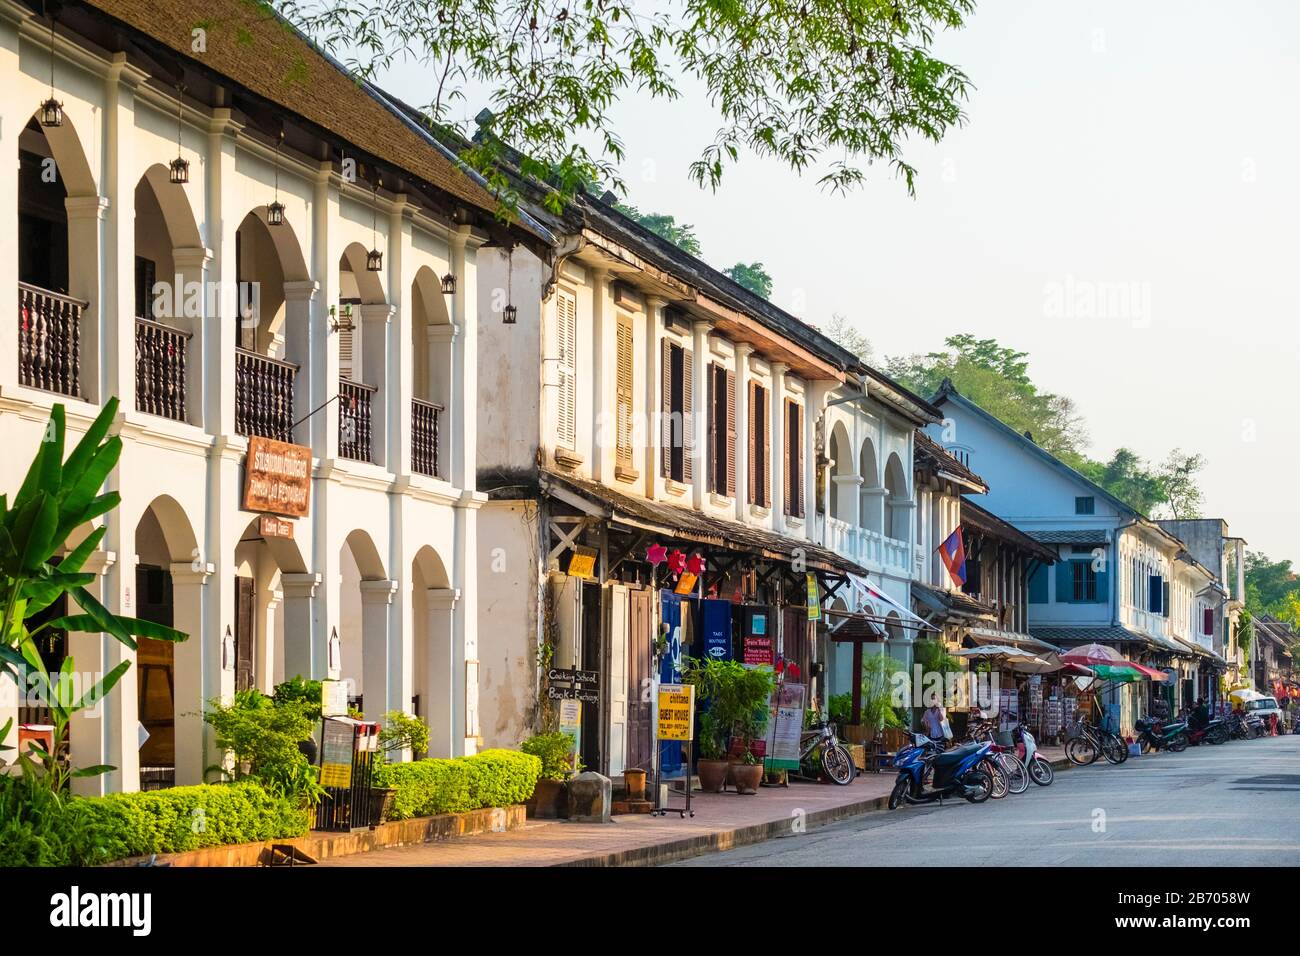 French colonial style buildings on Sakkaline Road in Luang Prabang historic district, Louangphabang Province, Laos Stock Photo